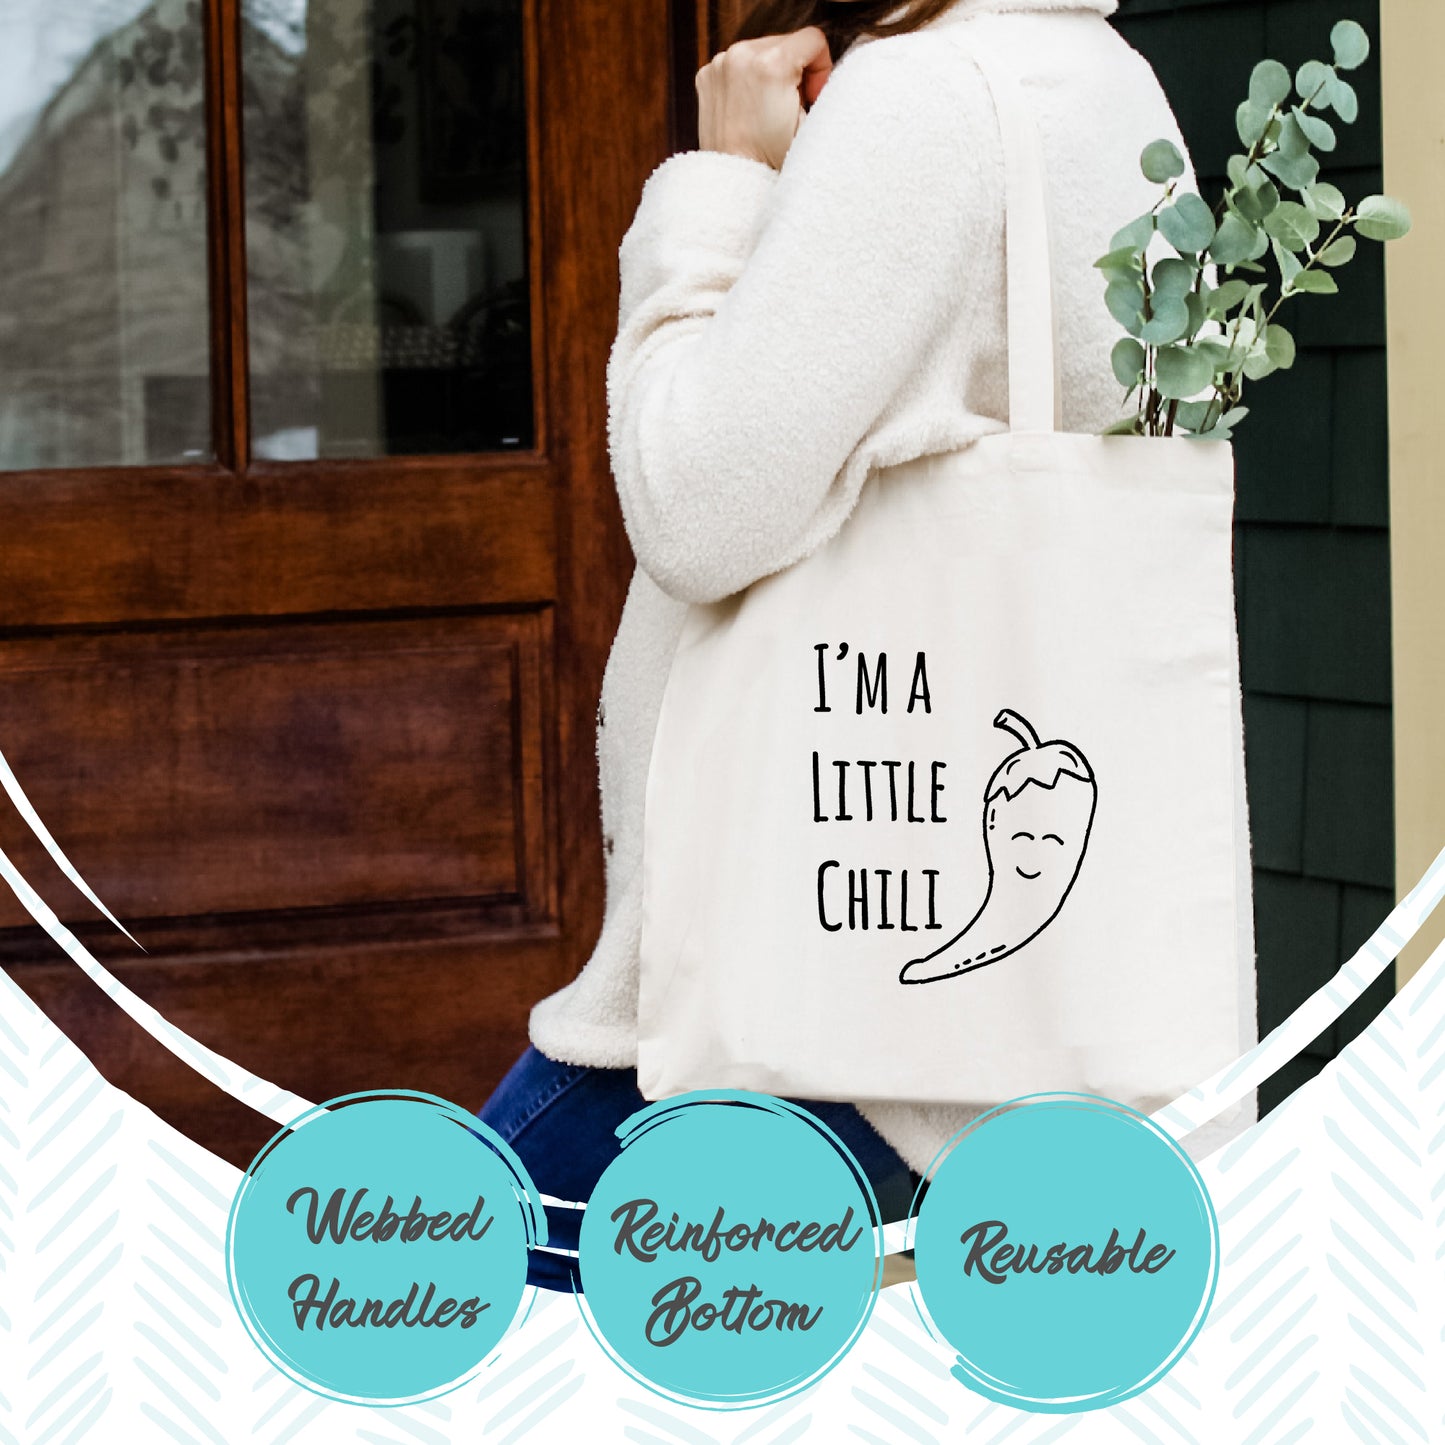 Save The Bees - Tote Bag - MoonlightMakers